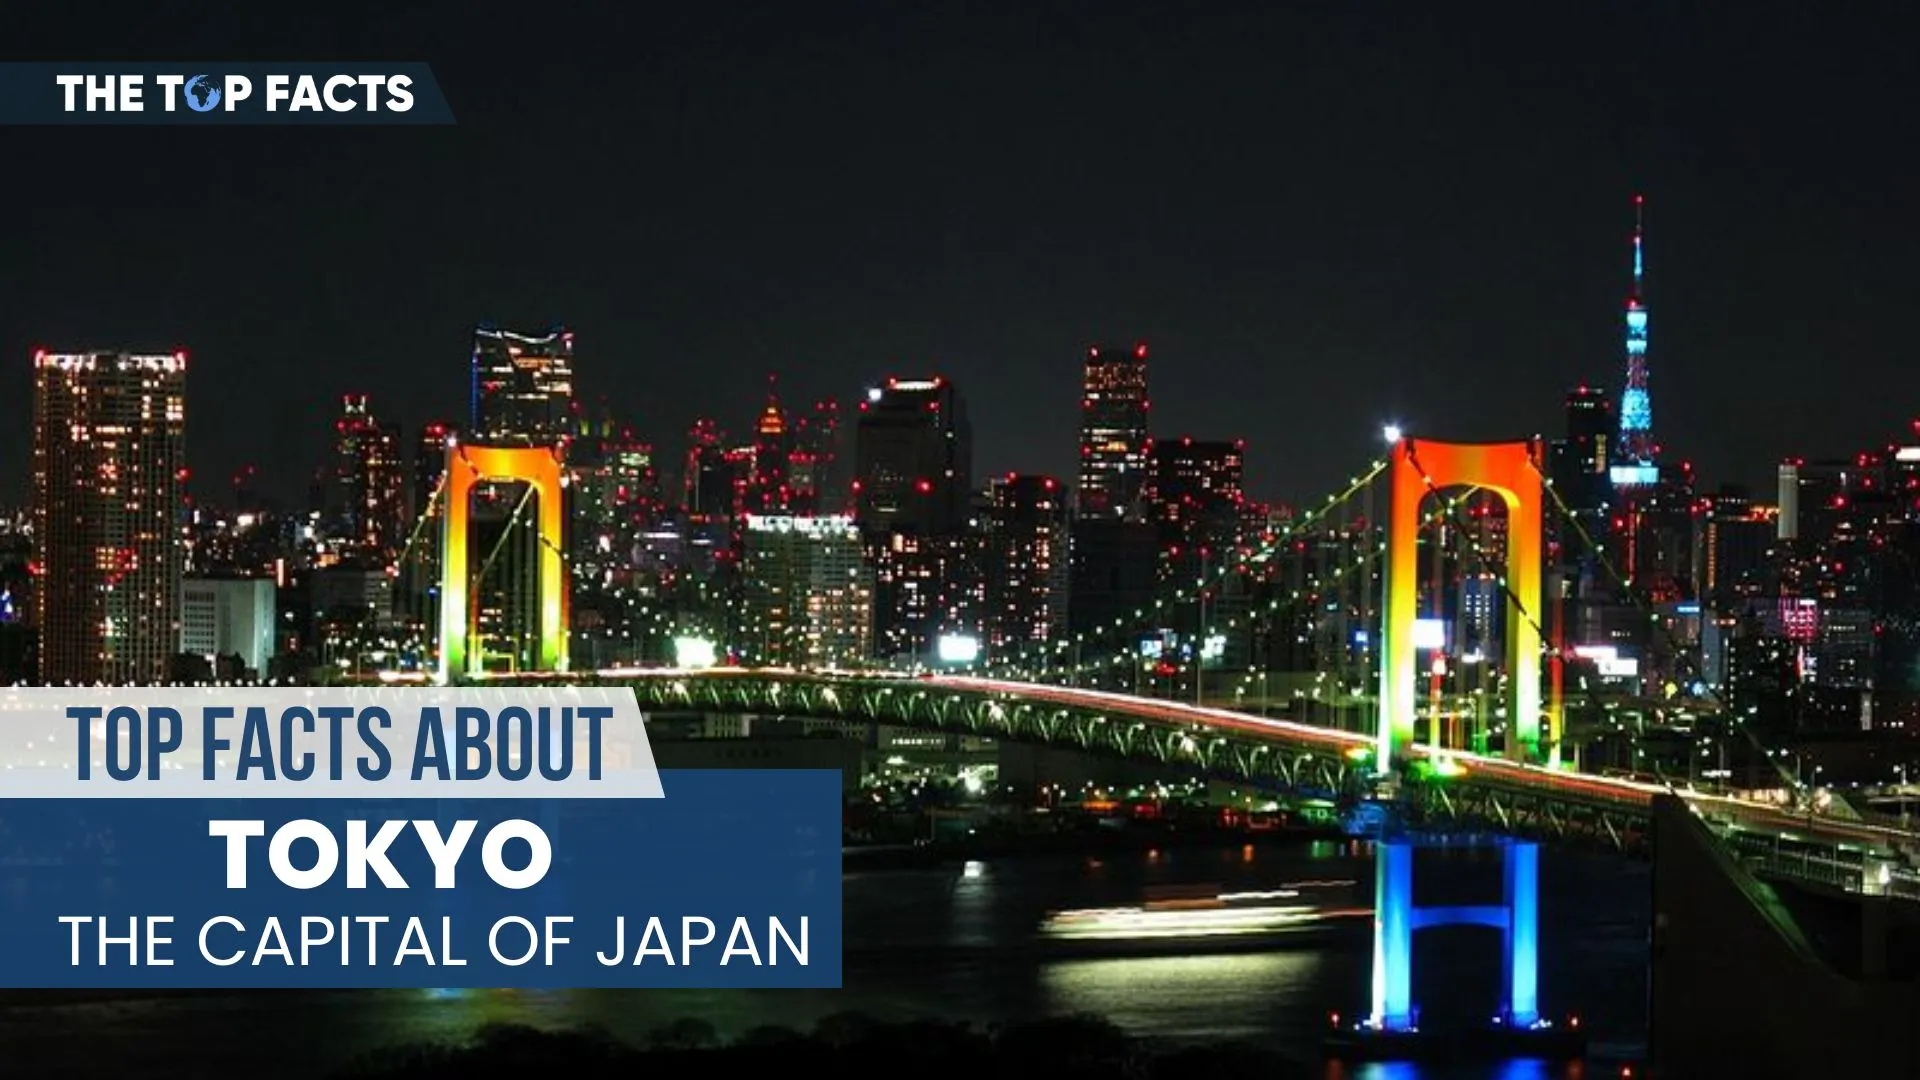 Top Facts About Tokyo, The Capital of Japan